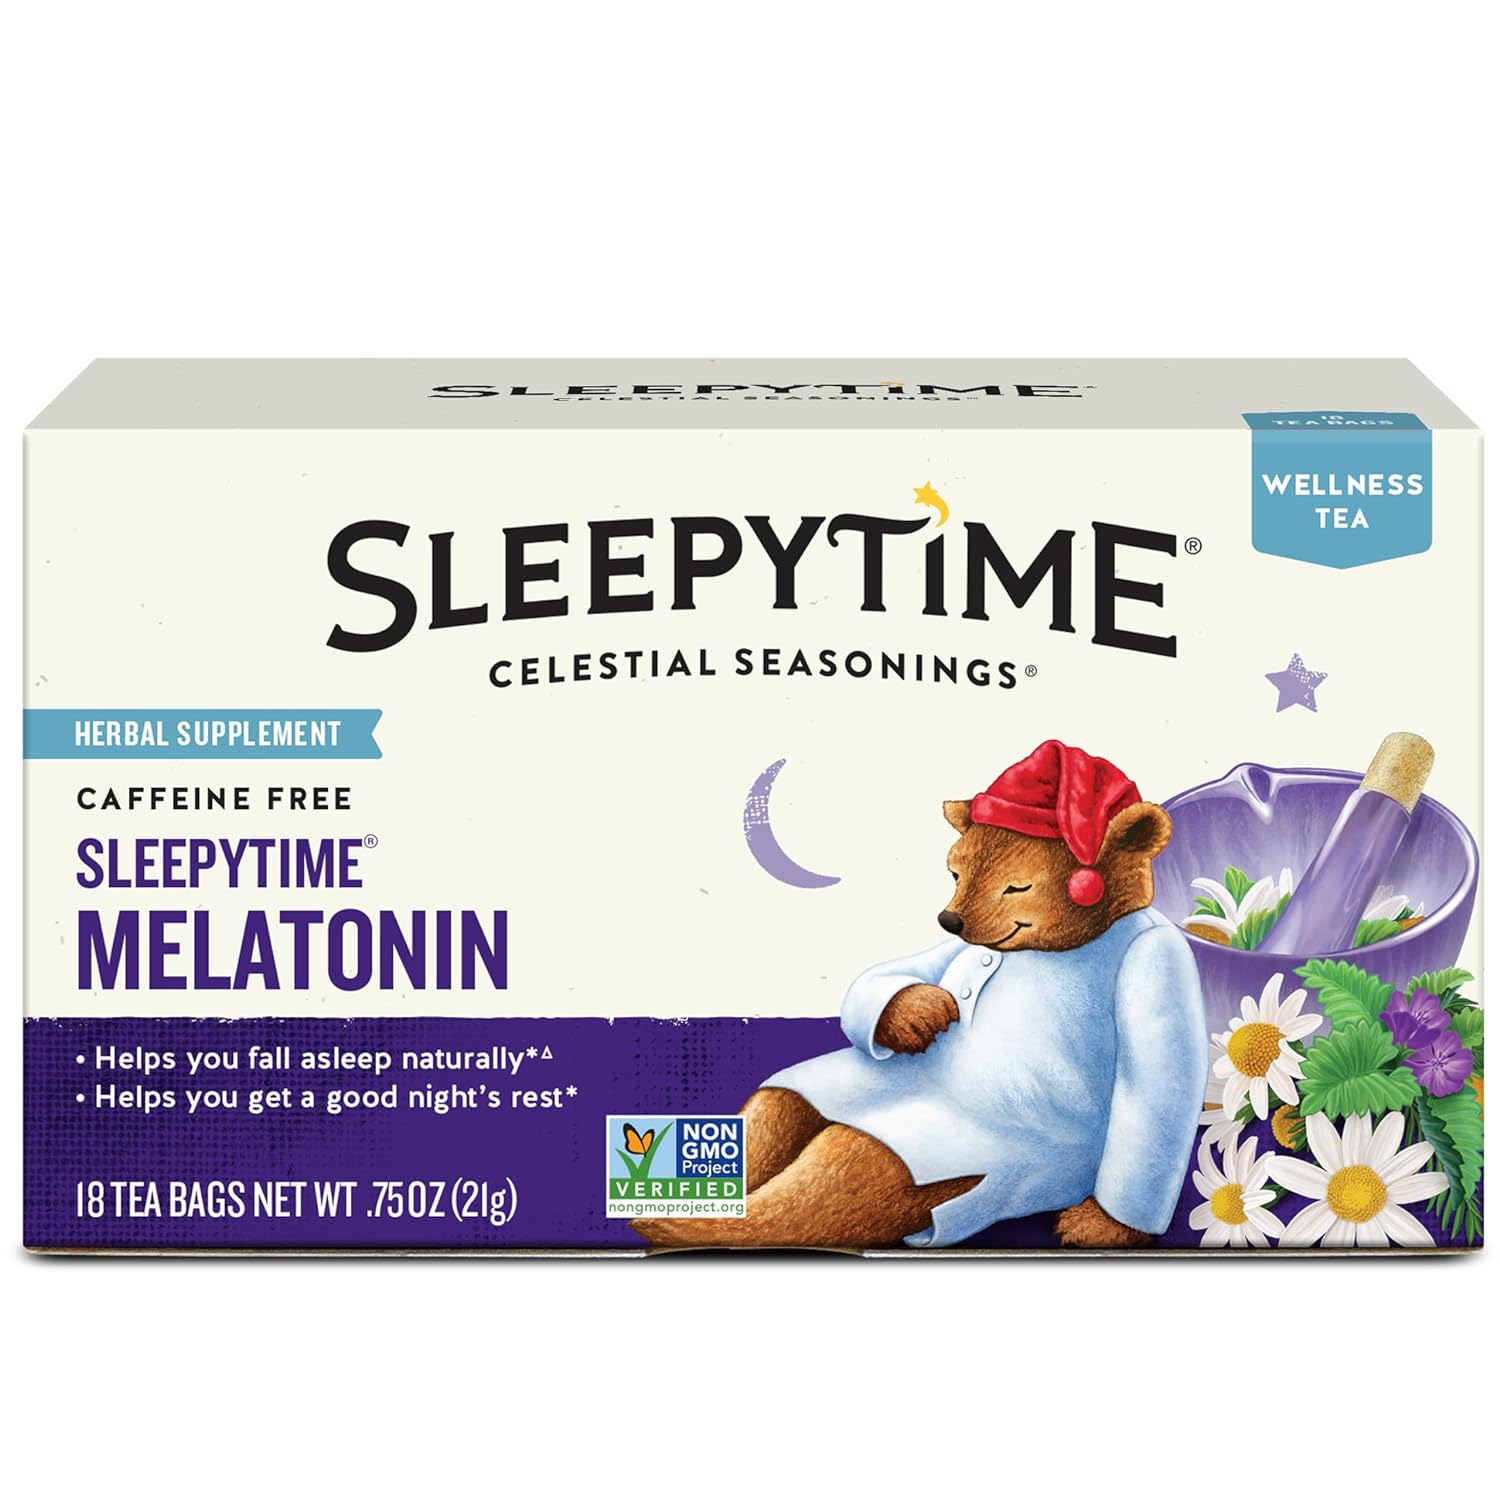 Best Sleeping Tea: Relax and Unwind with Nature's Soothing Elixir